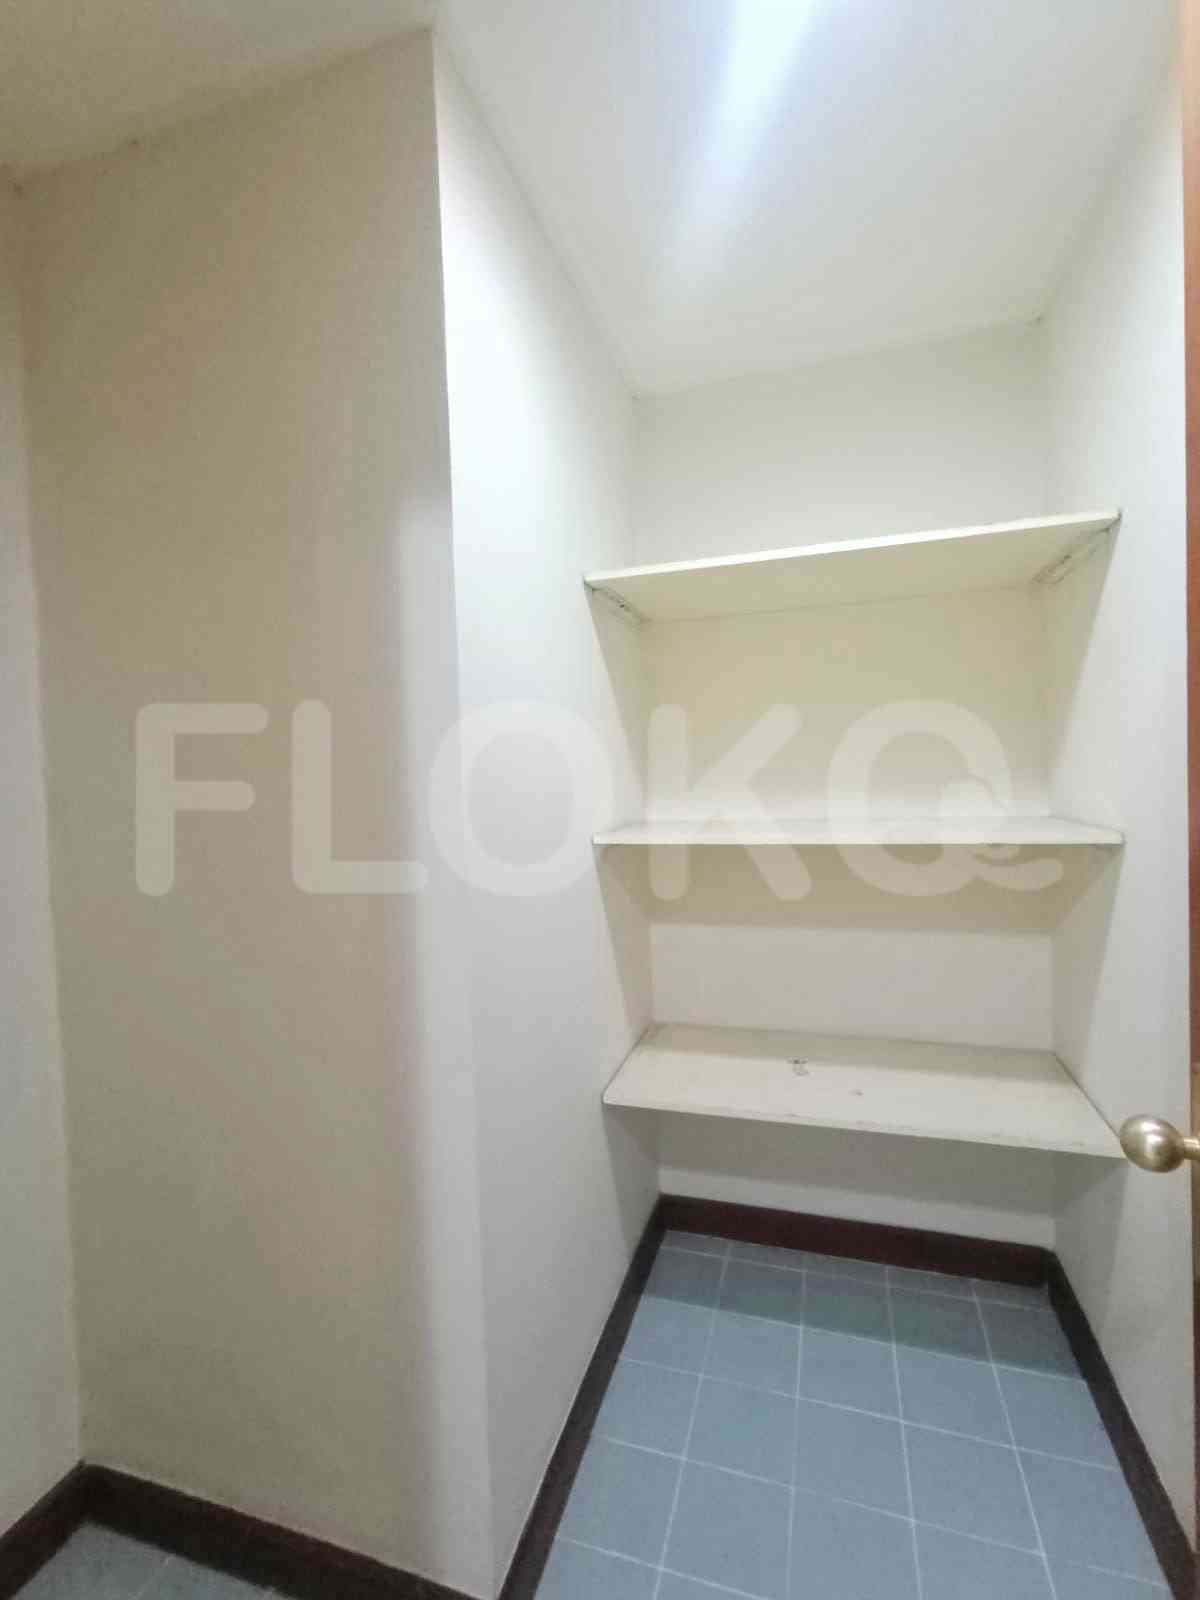 3 Bedroom on 15th Floor for Rent in Casablanca Apartment - fte88e 2